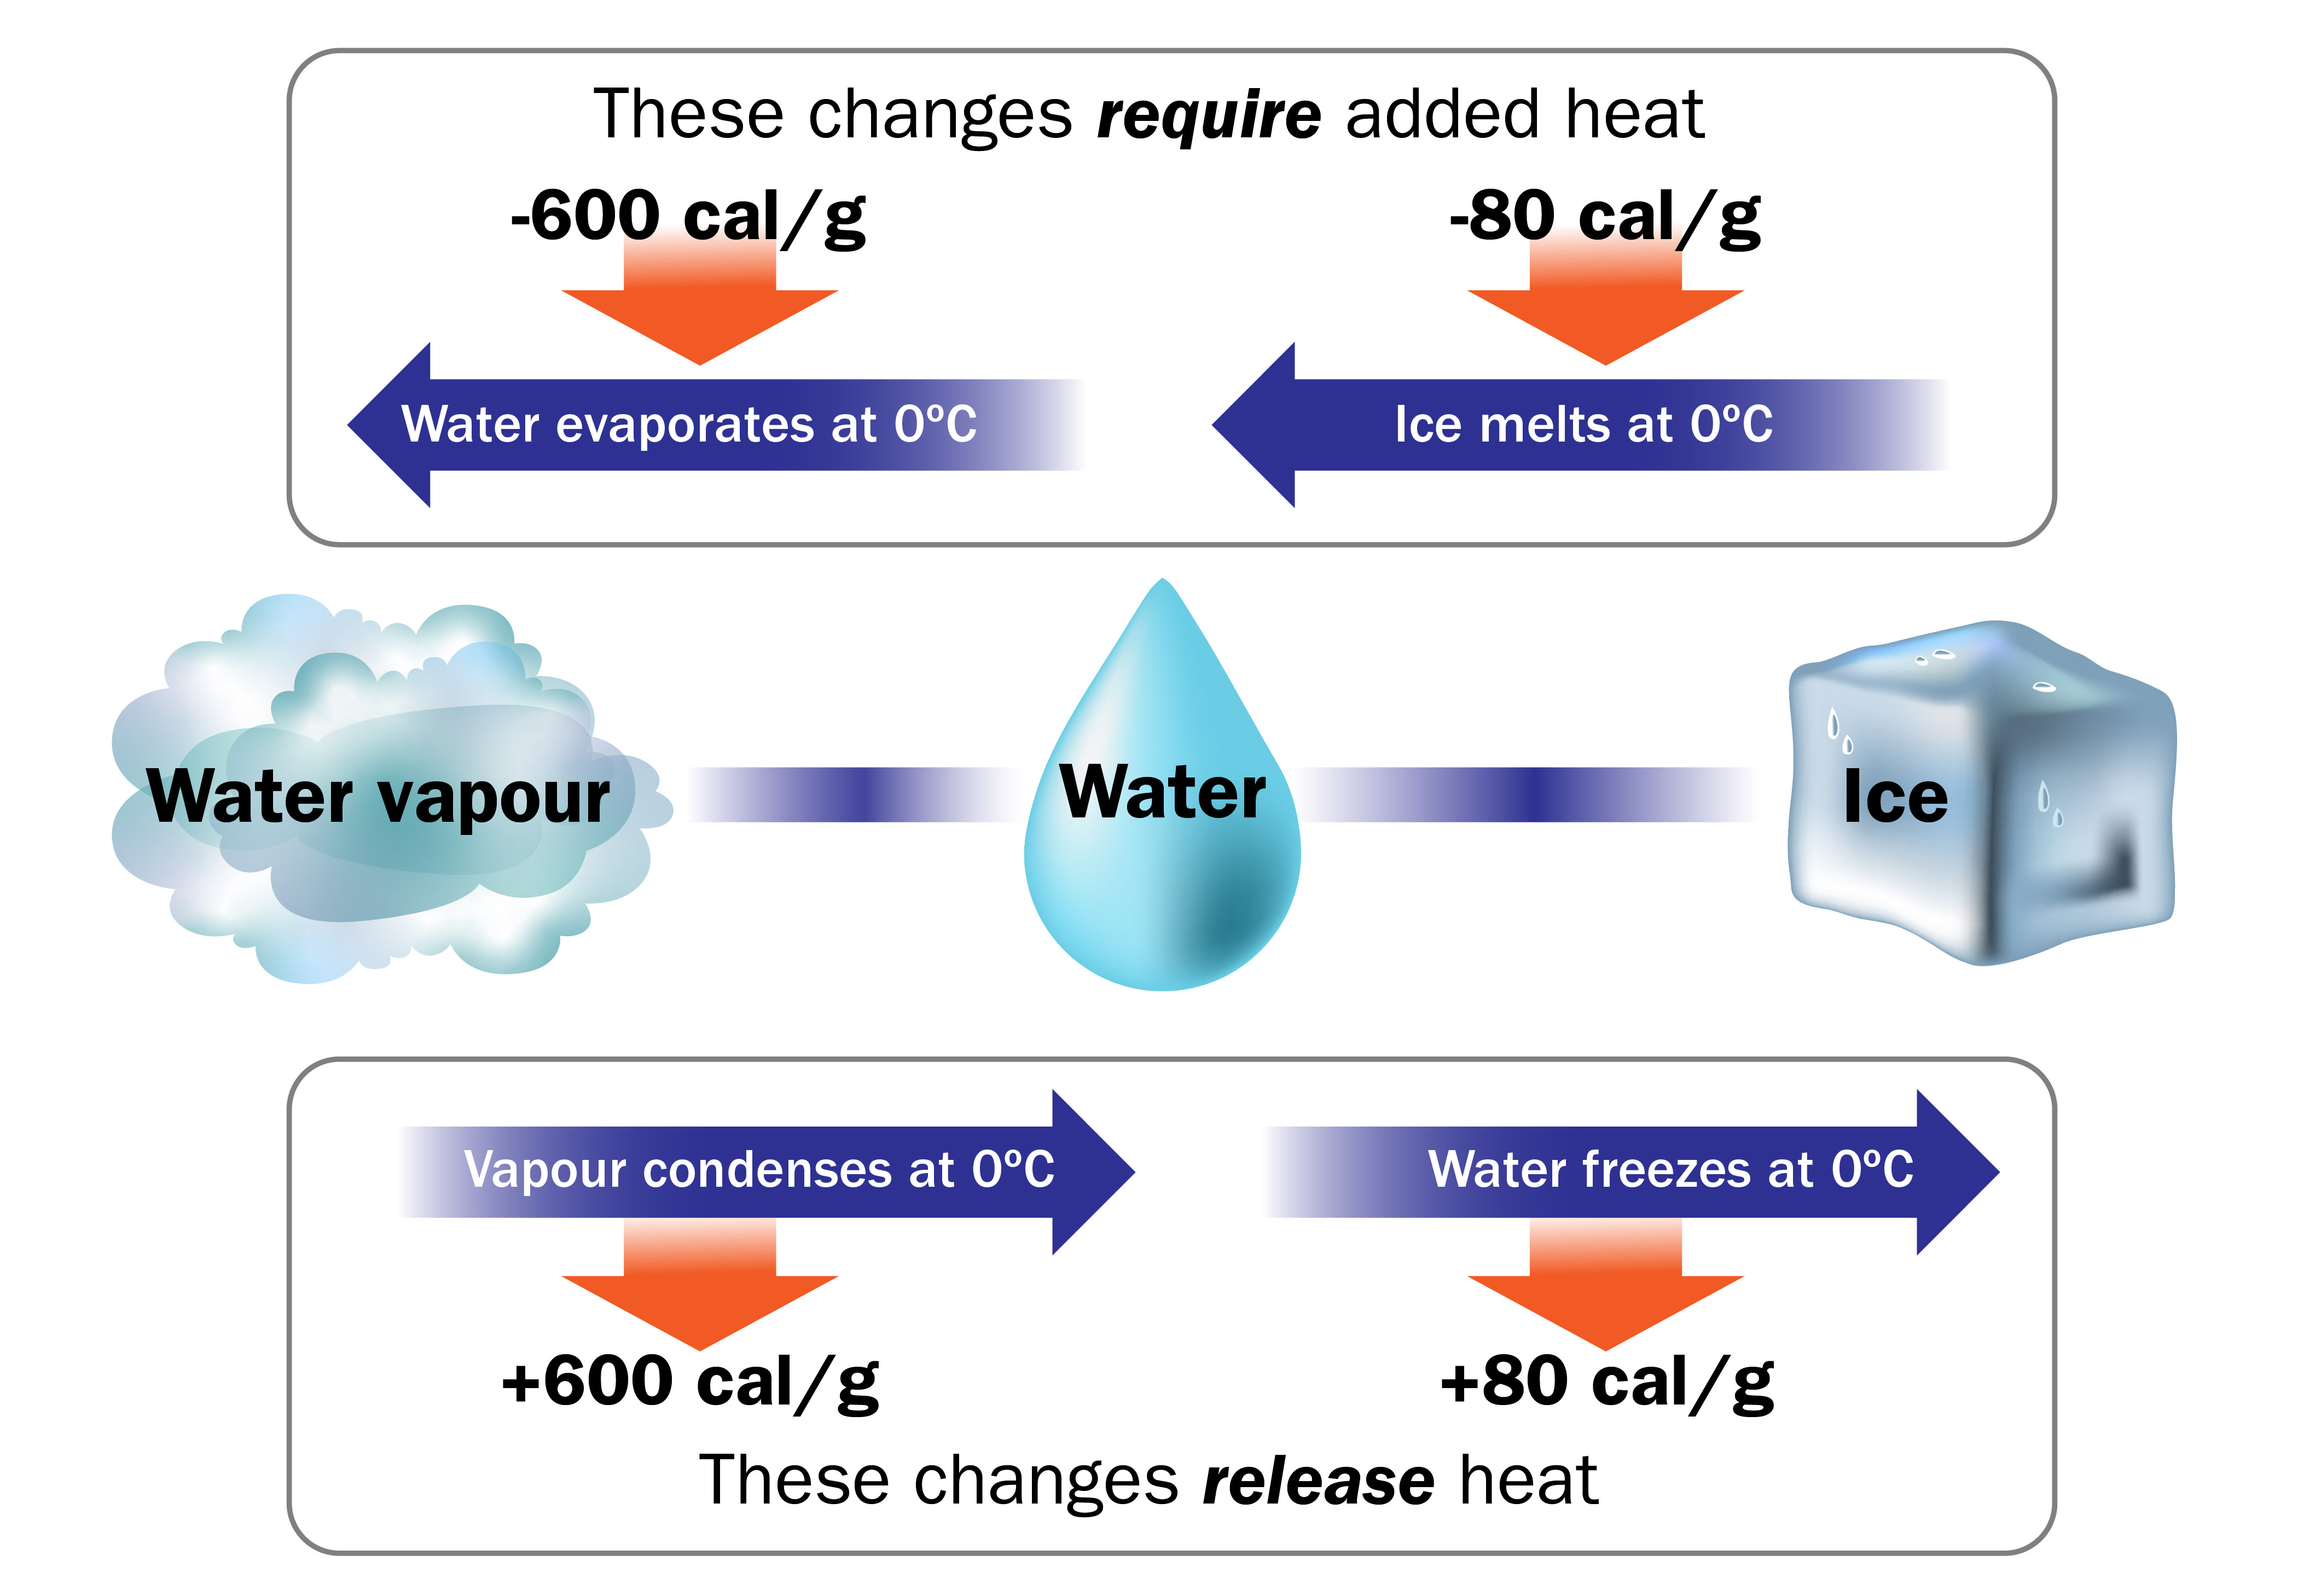 When water is warming it requires added heat and therefore the air around it cools: Water evaporates at 0°C. It requires -600 cal/g. Ice melts at 0°C. It requires -80 cal/g. When water is cooling it releases heat and therefore the air around it warms: Vapour condenses at 0°C. It releases +600 cal/g. Water freezes at 0°C. It releases +80 cal/g. Water’s changes in state are illustrated with a water droplet in the centre, water vapour on the left and a cube of ice on the right. The blue arrows indicate the process of changing state (left to right: evaporates, melts, condenses, freezes) and the red arrows indicate the “required added heat” or “released heat”.